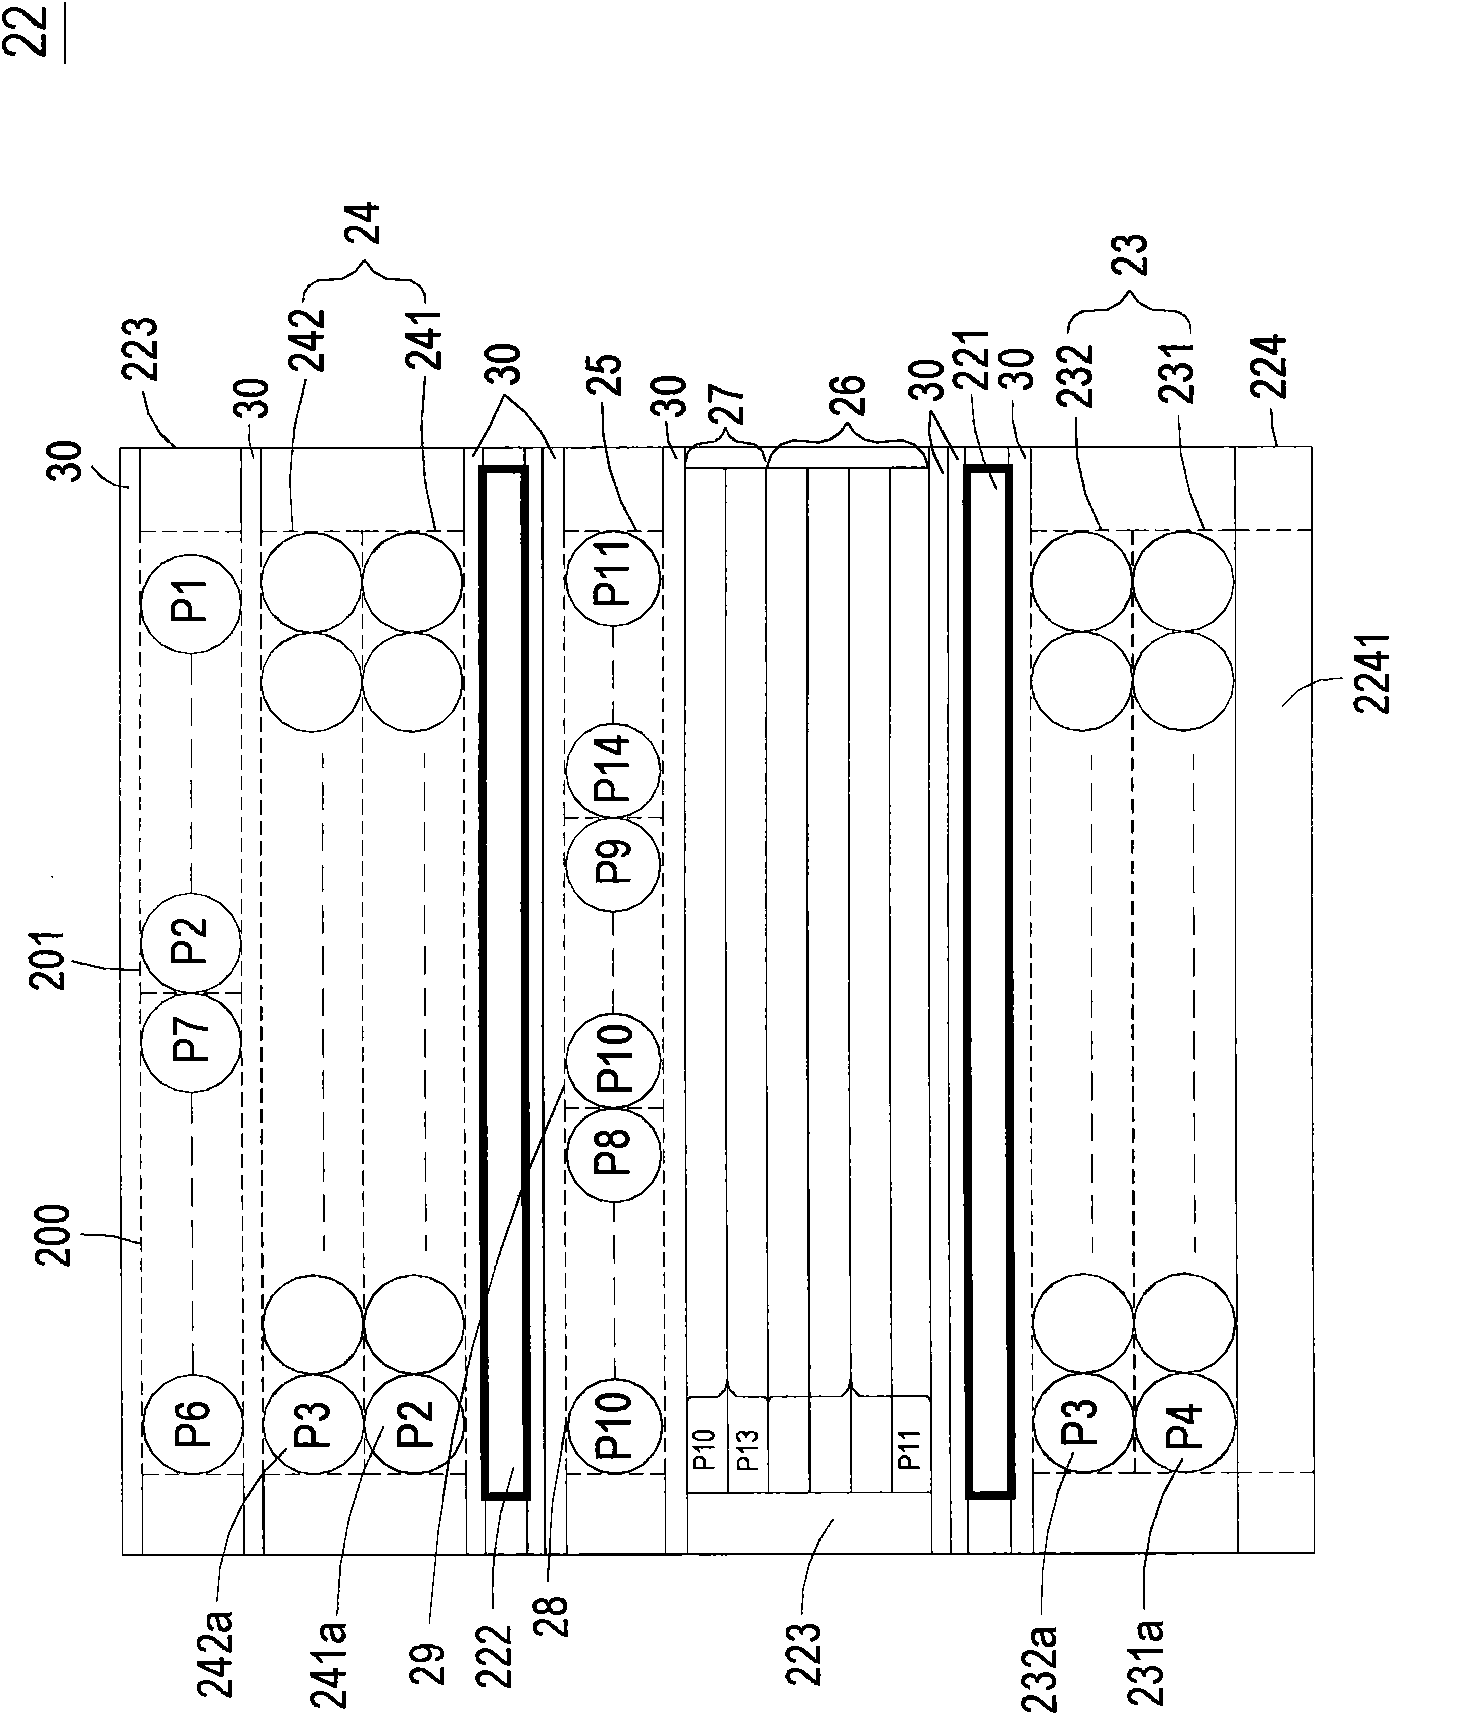 Transformer used for reducing electromagnetic interference influence and applicable power switching circuit thereof